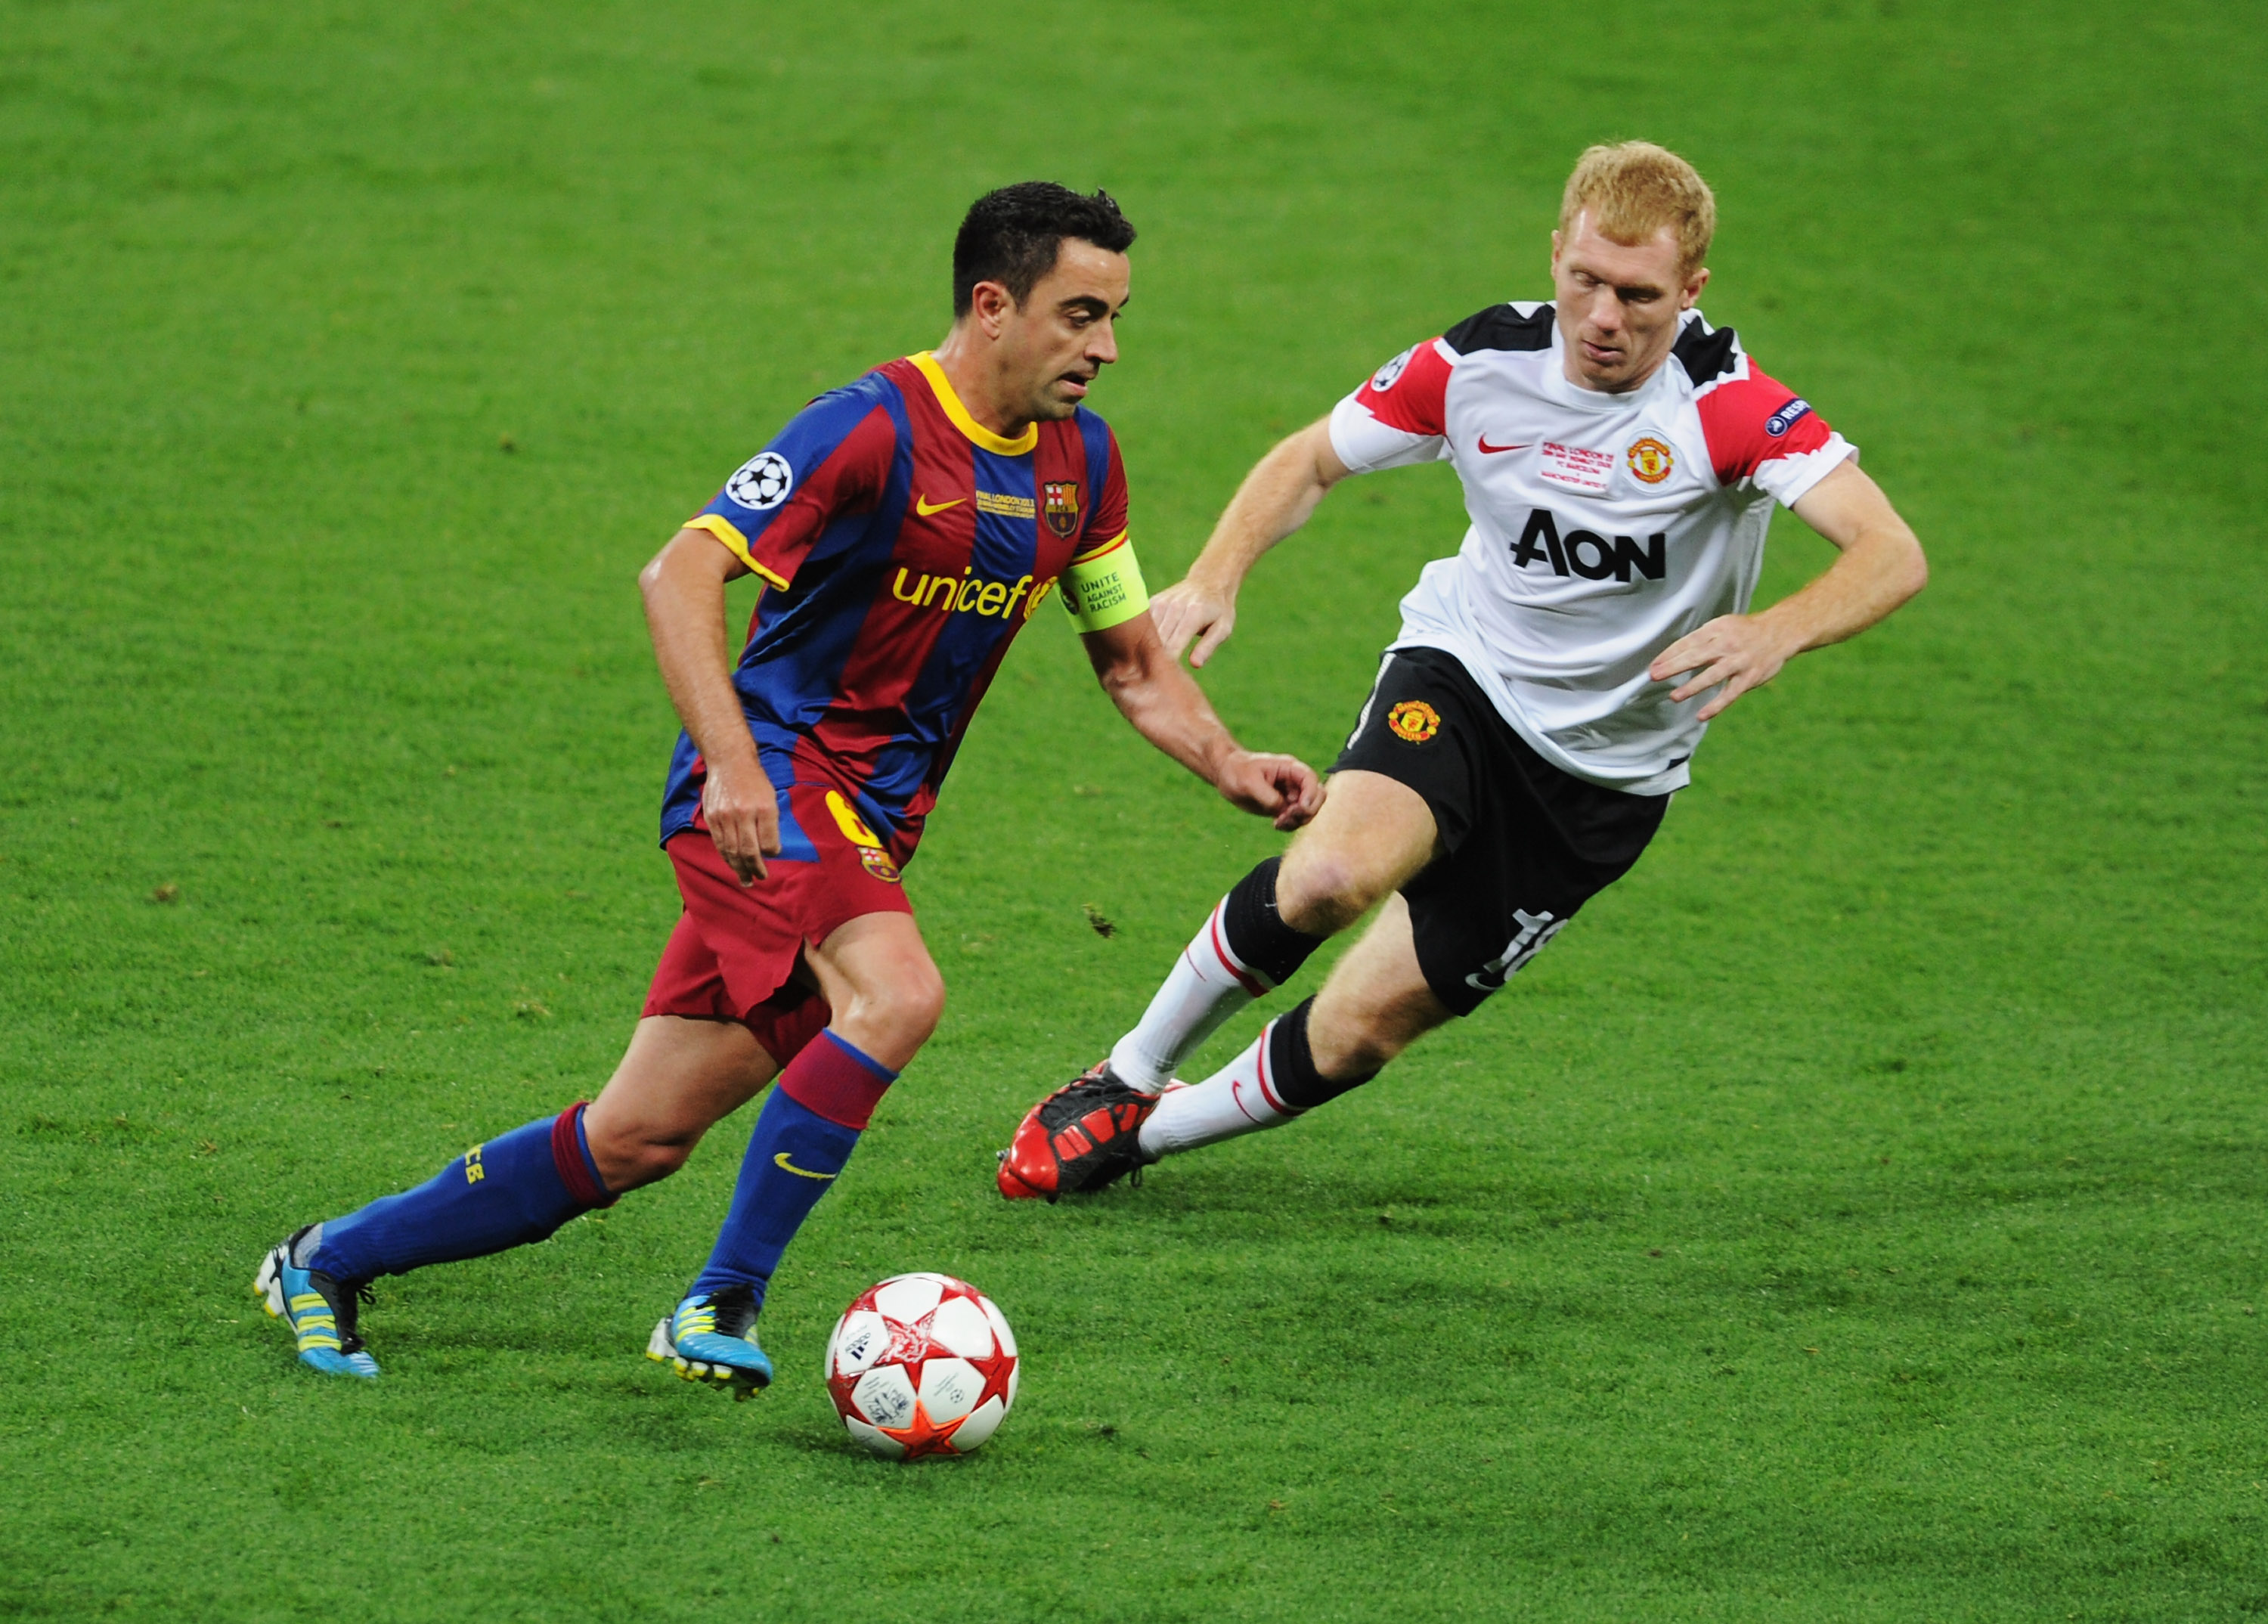 LONDON, ENGLAND - MAY 28:  Xavi of FC Barcelona is watched by Paul Scholes of Manchester United during the UEFA Champions League final between FC Barcelona and Manchester United FC at Wembley Stadium on May 28, 2011 in London, England.  (Photo by Michael